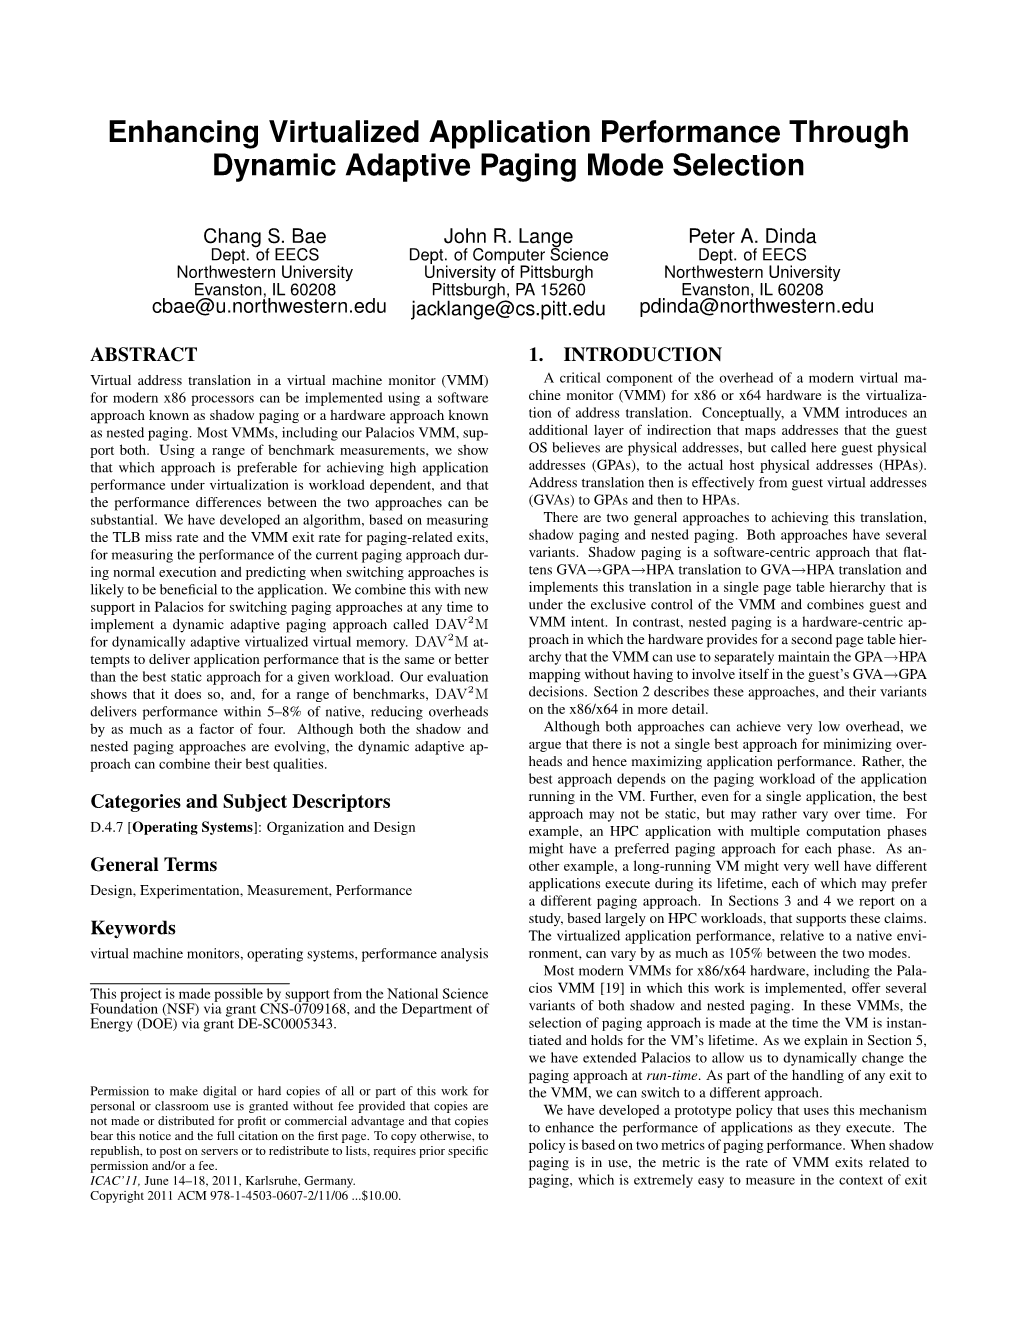 Enhancing Virtualized Application Performance Through Dynamic Adaptive Paging Mode Selection